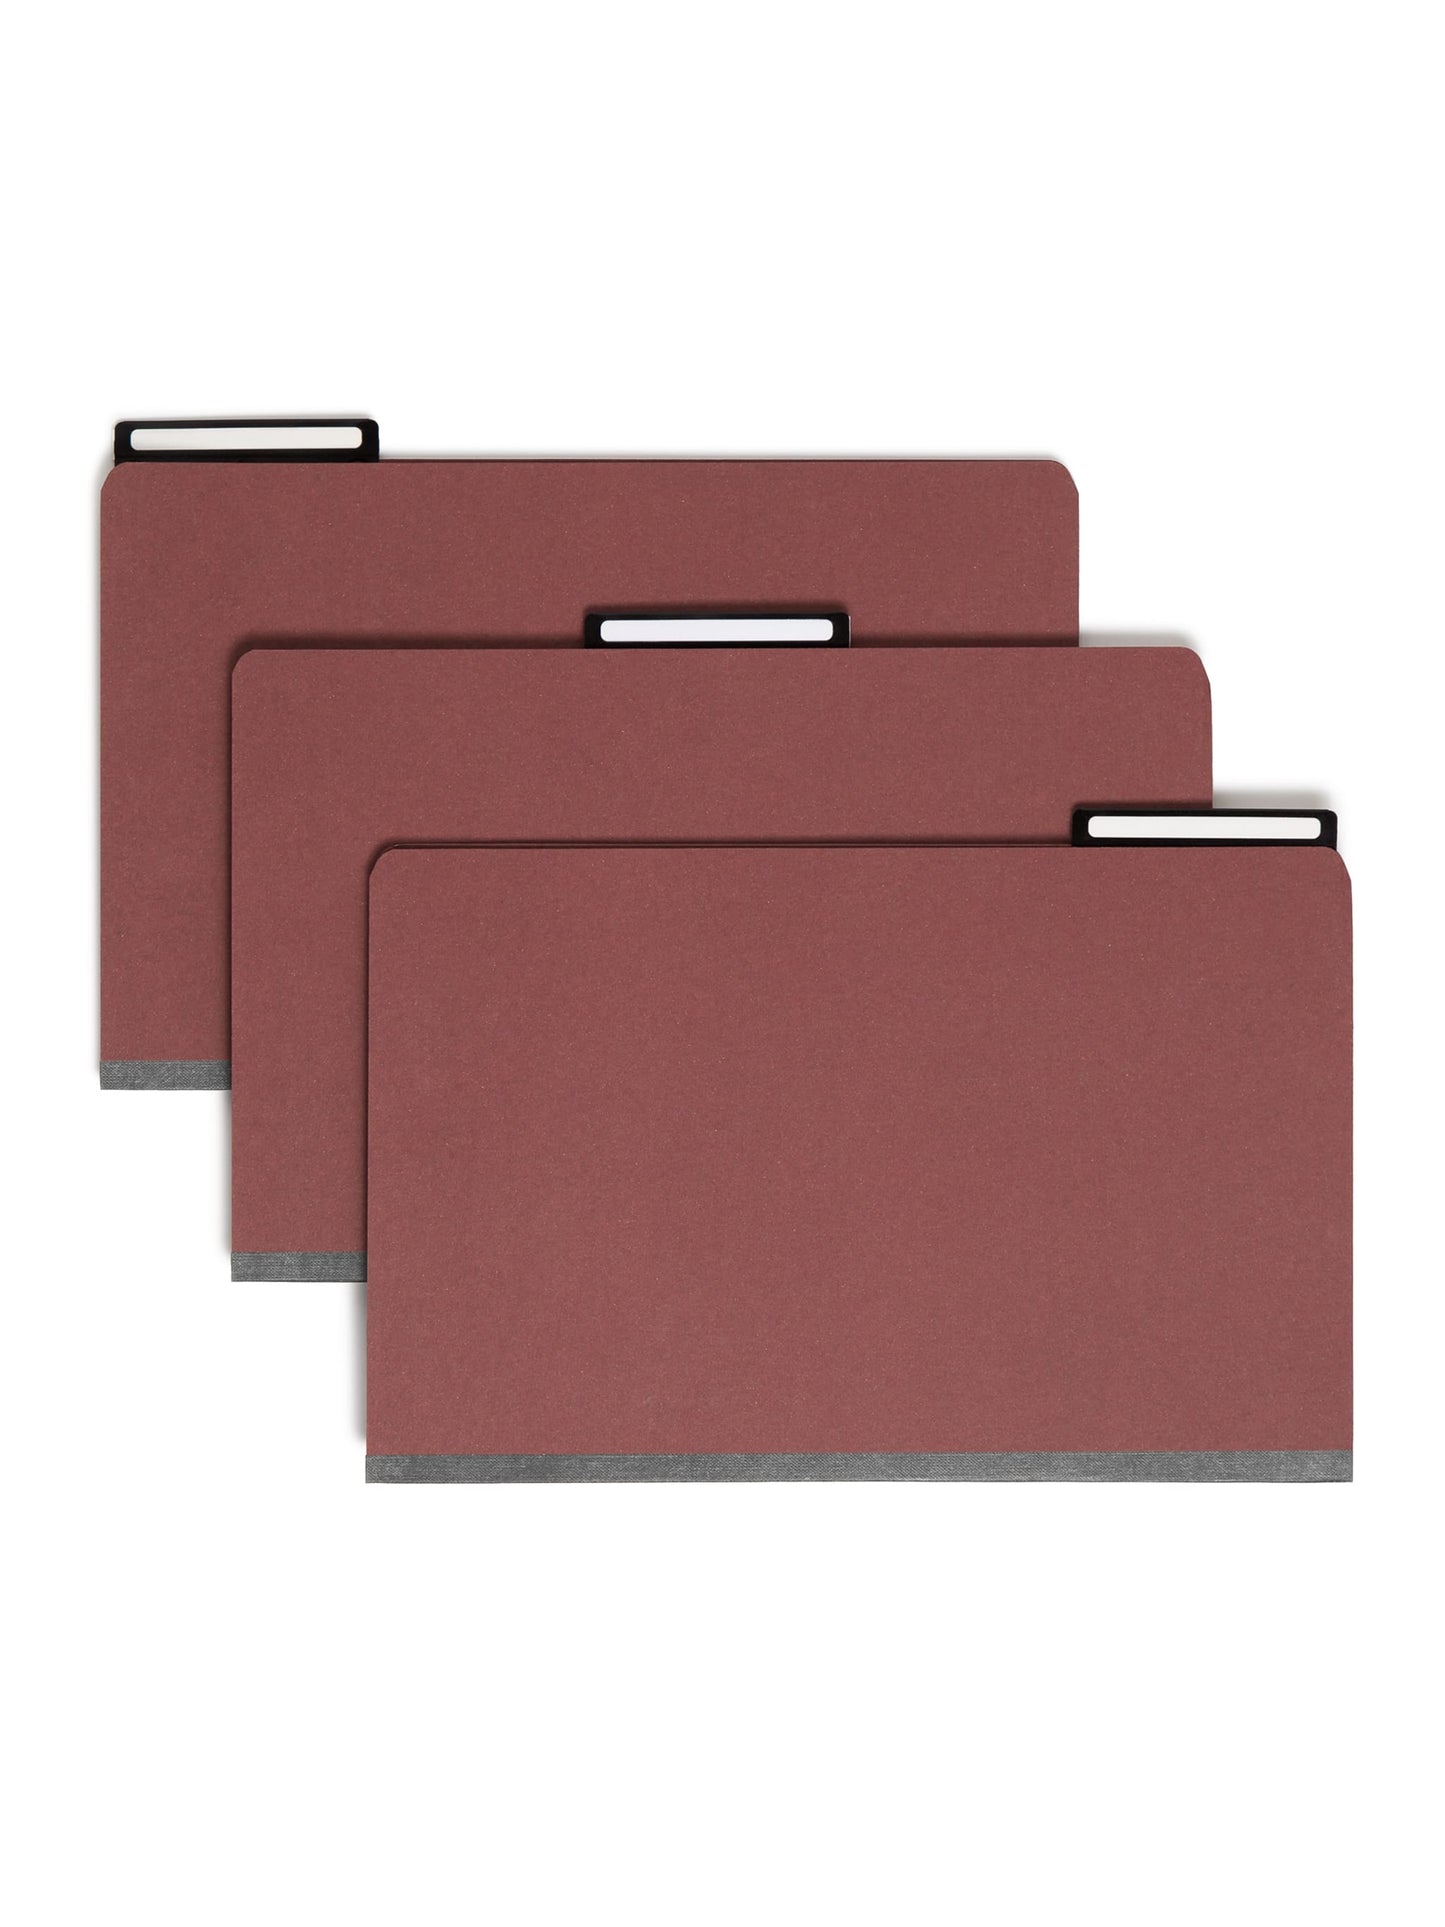 SafeSHIELD® Pressboard Classification File Folders, 2 Dividers, 2 inch Expansion, Metal Tab, Red Color, Legal Size, Set of 0, 30086486192300